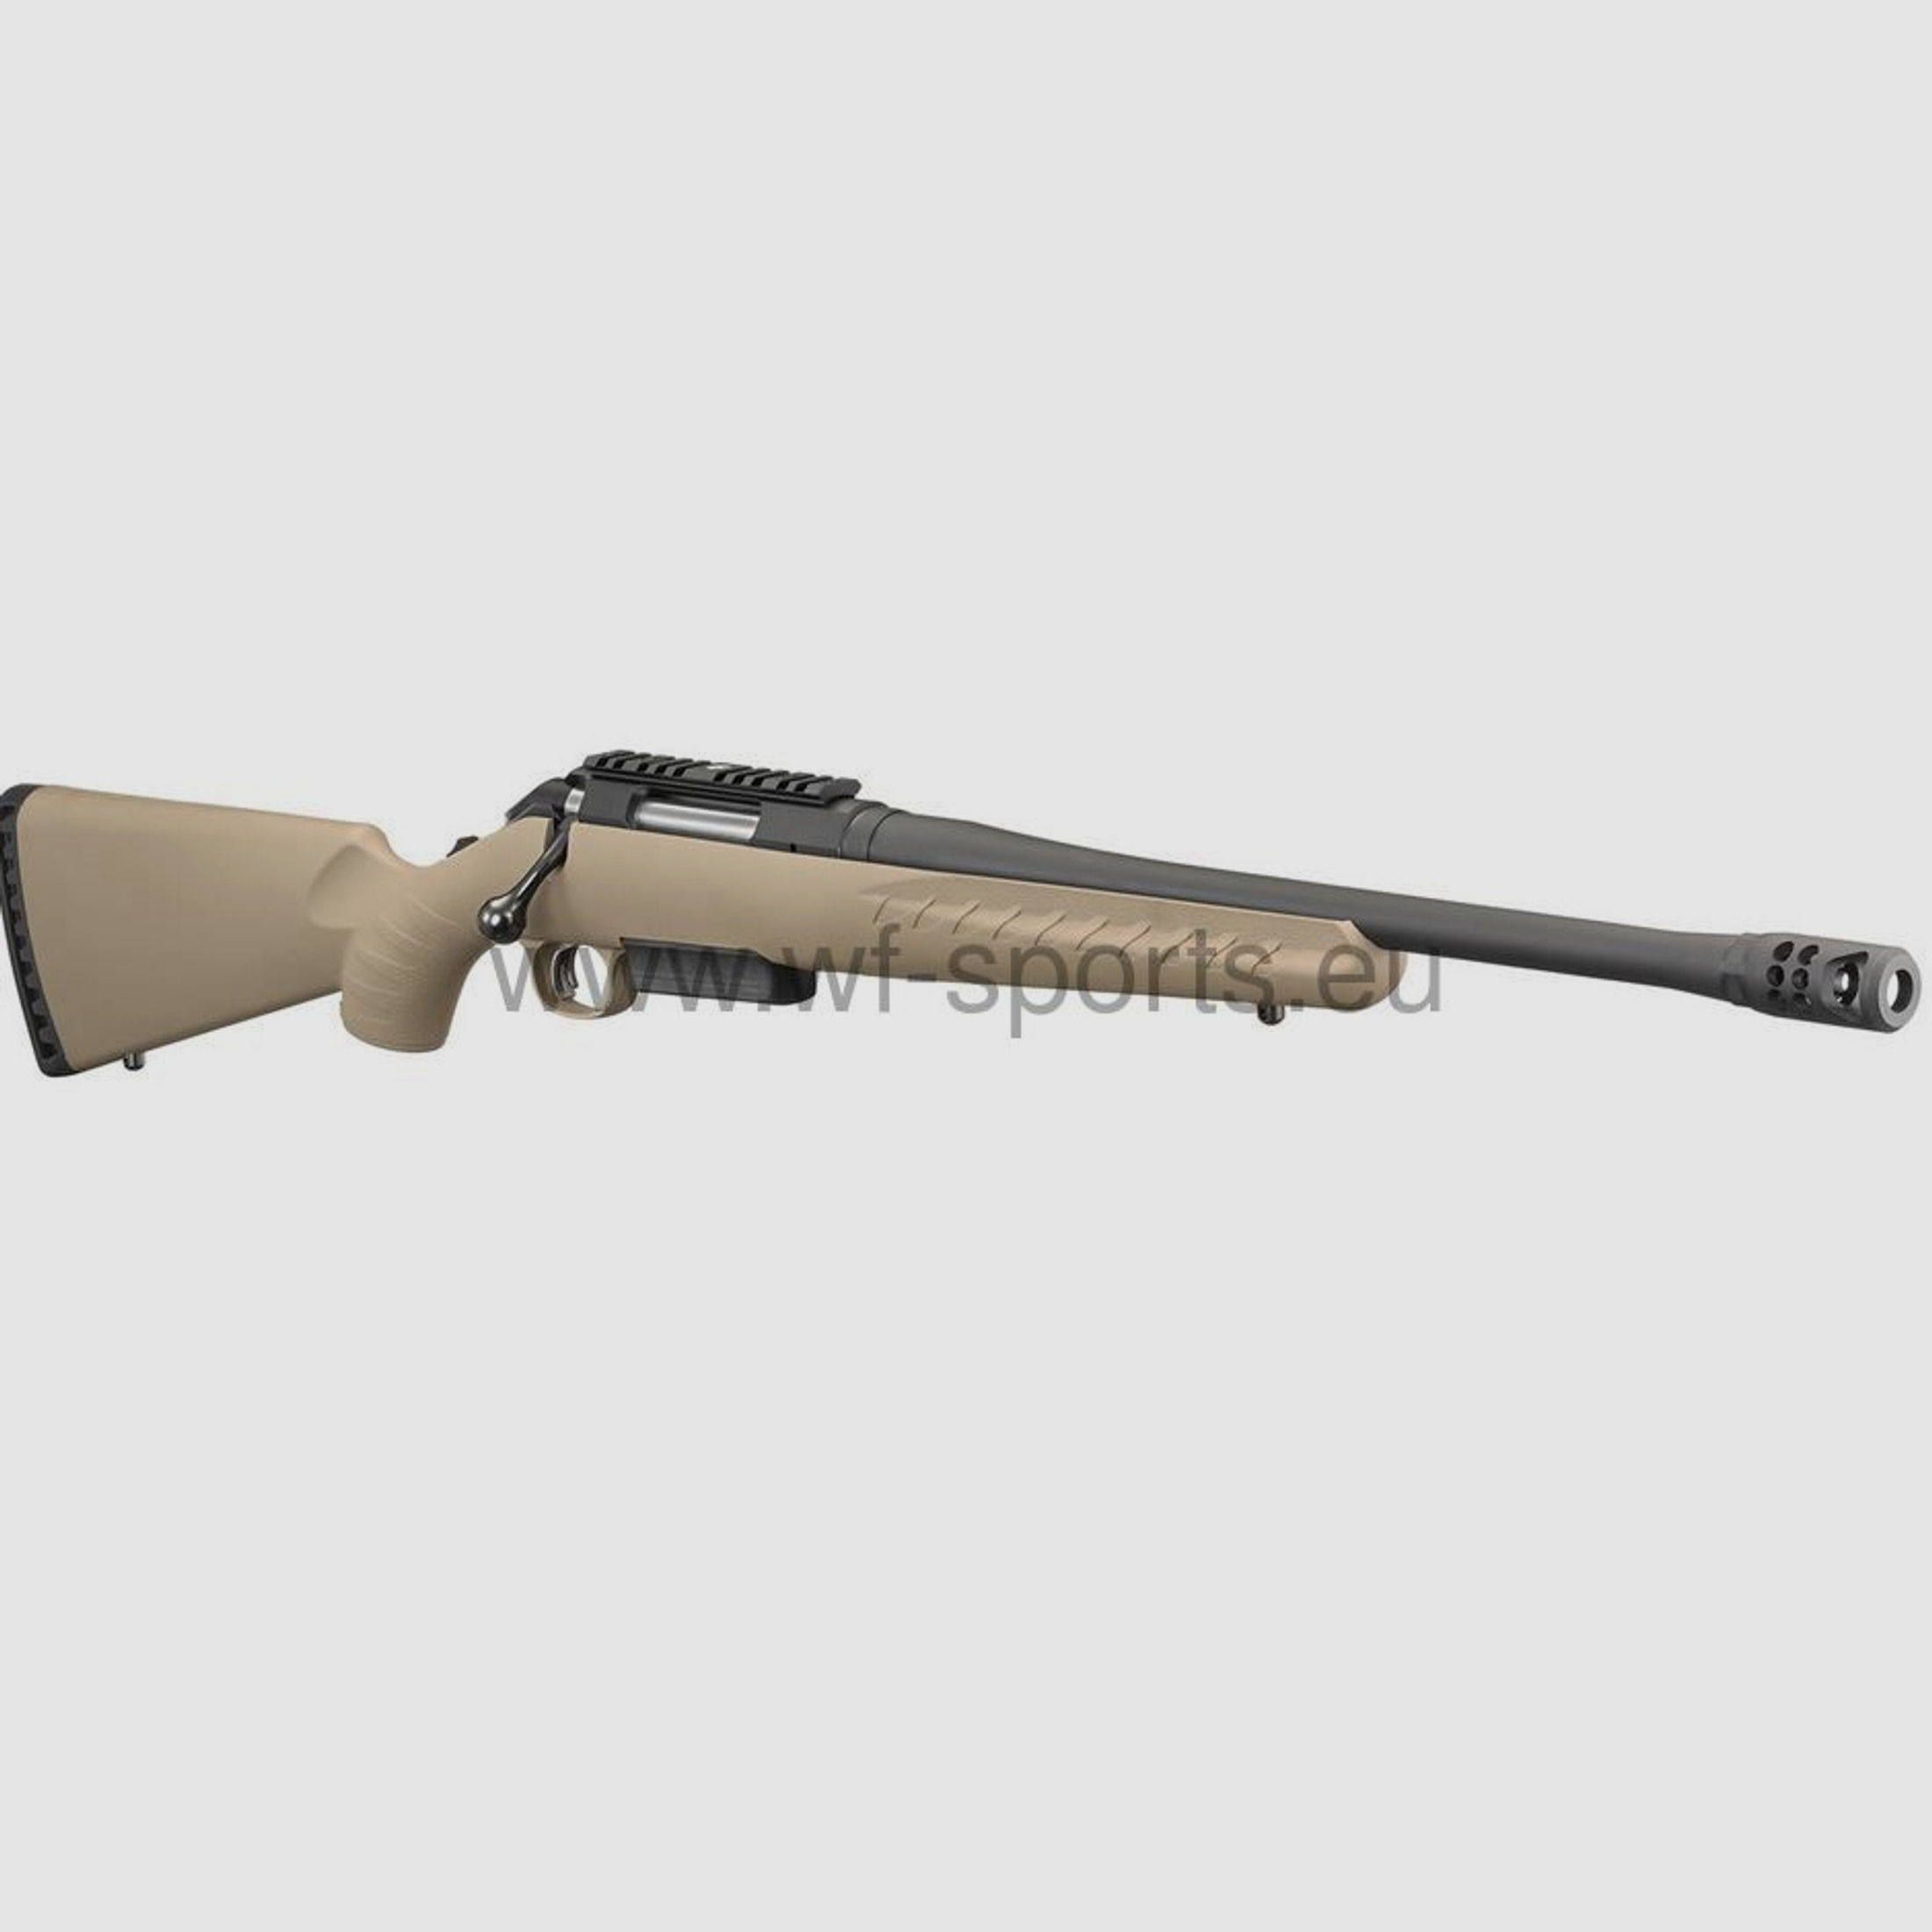 Ruger American Rifle Ranch in 450 Bushmaster	 WF-SPORTS